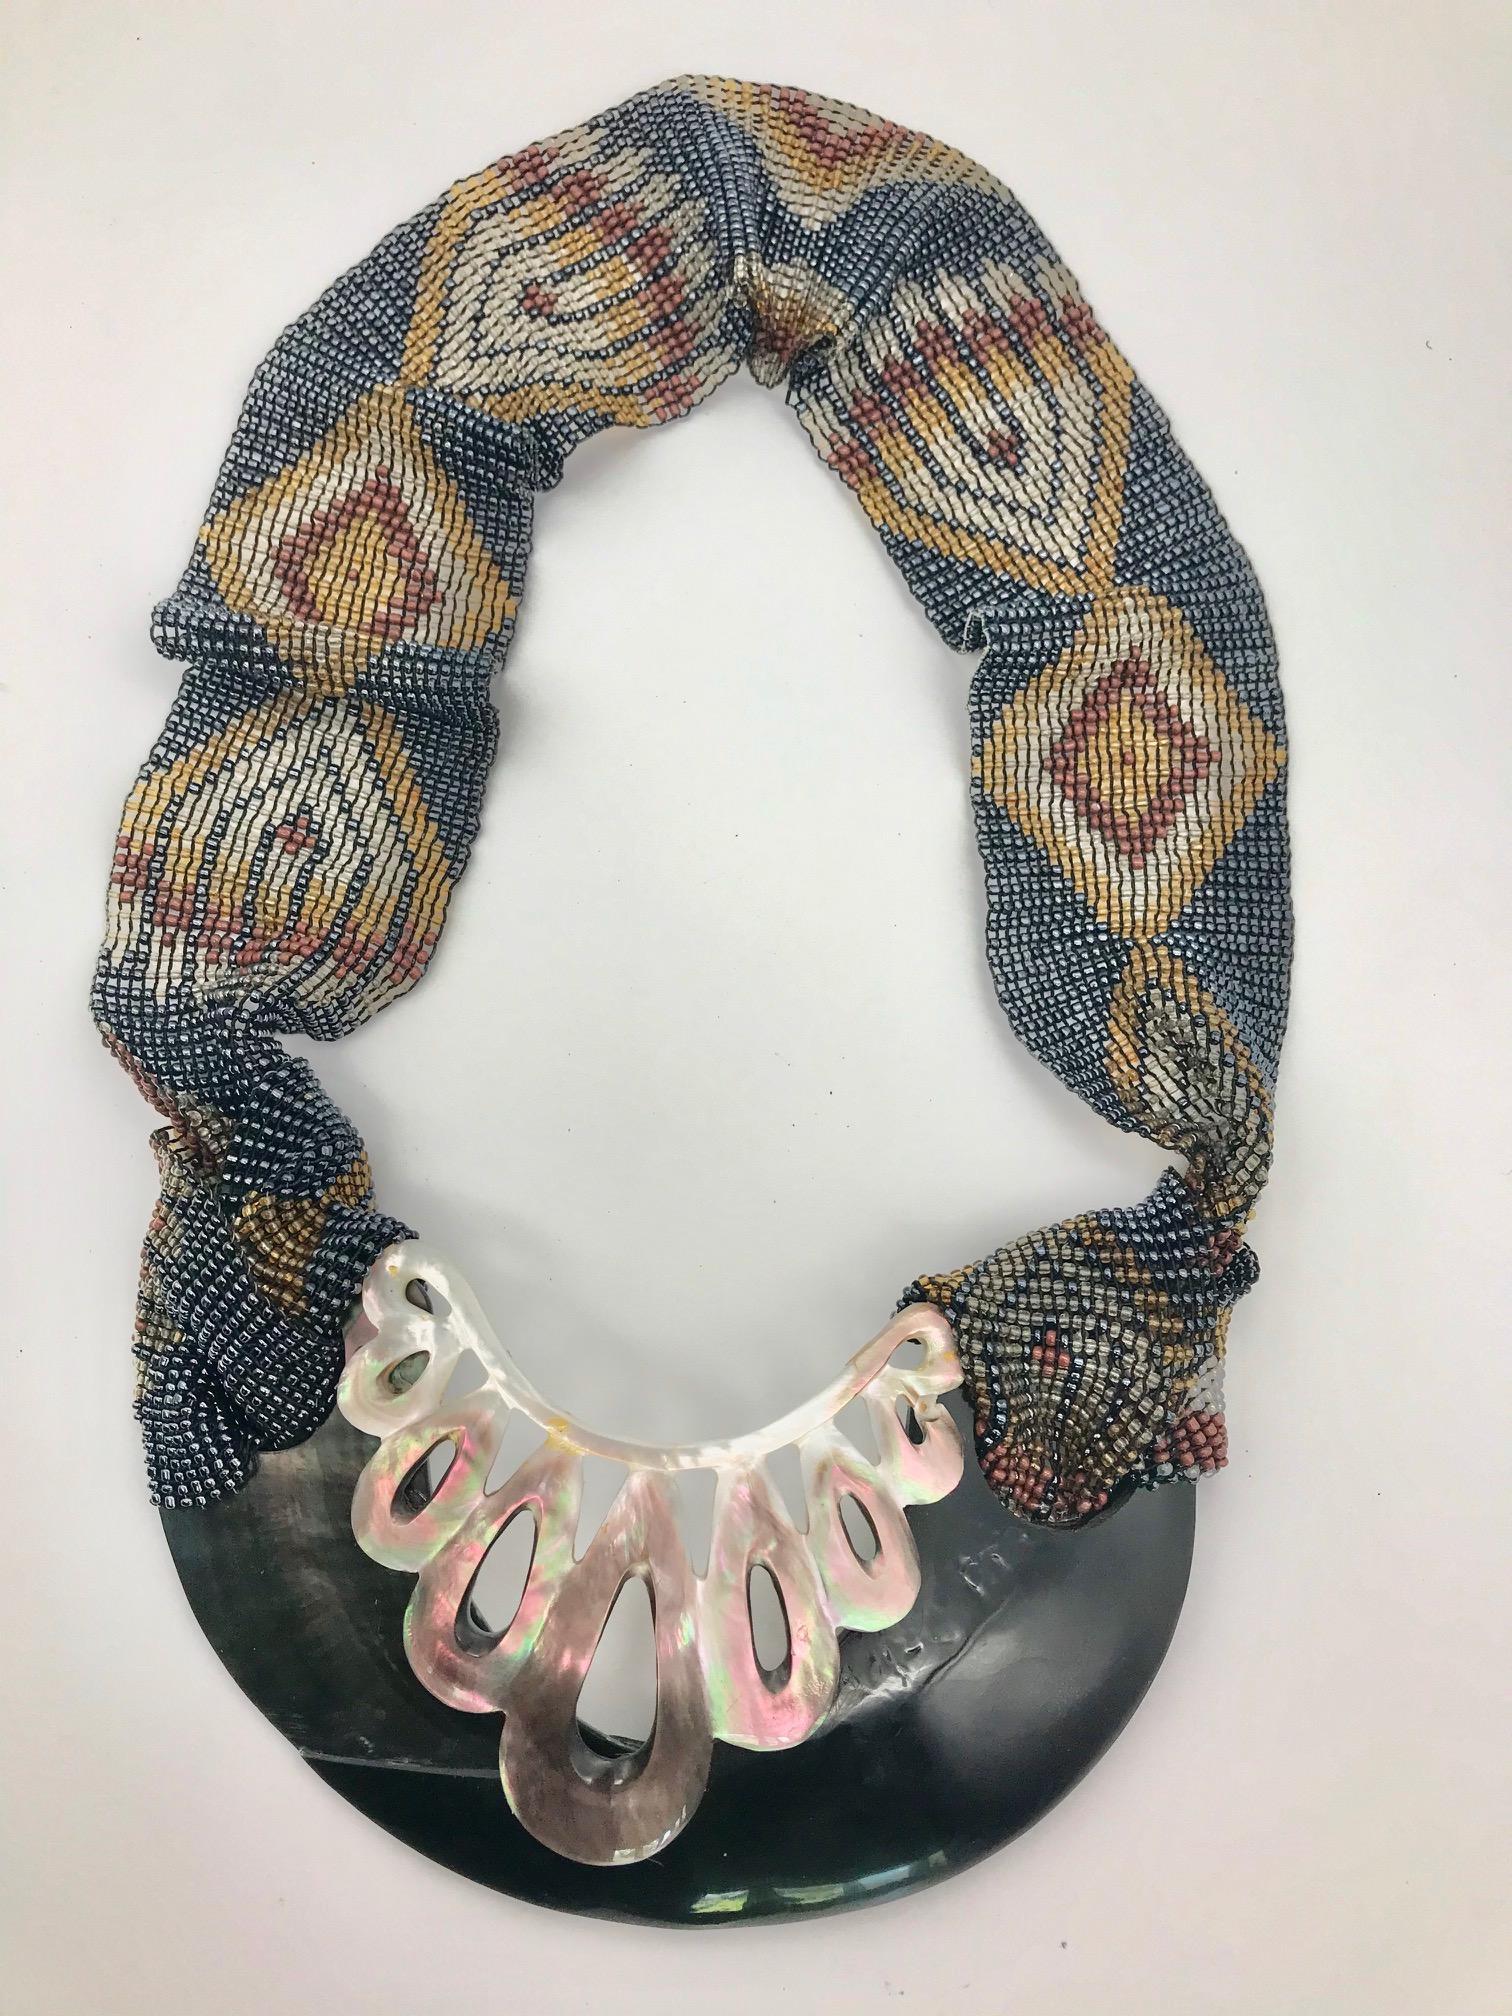 This Statement Necklace is eco-luxe and sustainable.
The materials used are iridescent mother of pearl/nacre and  black
resin ,enhanced by  hand carved mother of pearl piece from Bali , and
hand beaded decorated strap also from Bali.This piece of